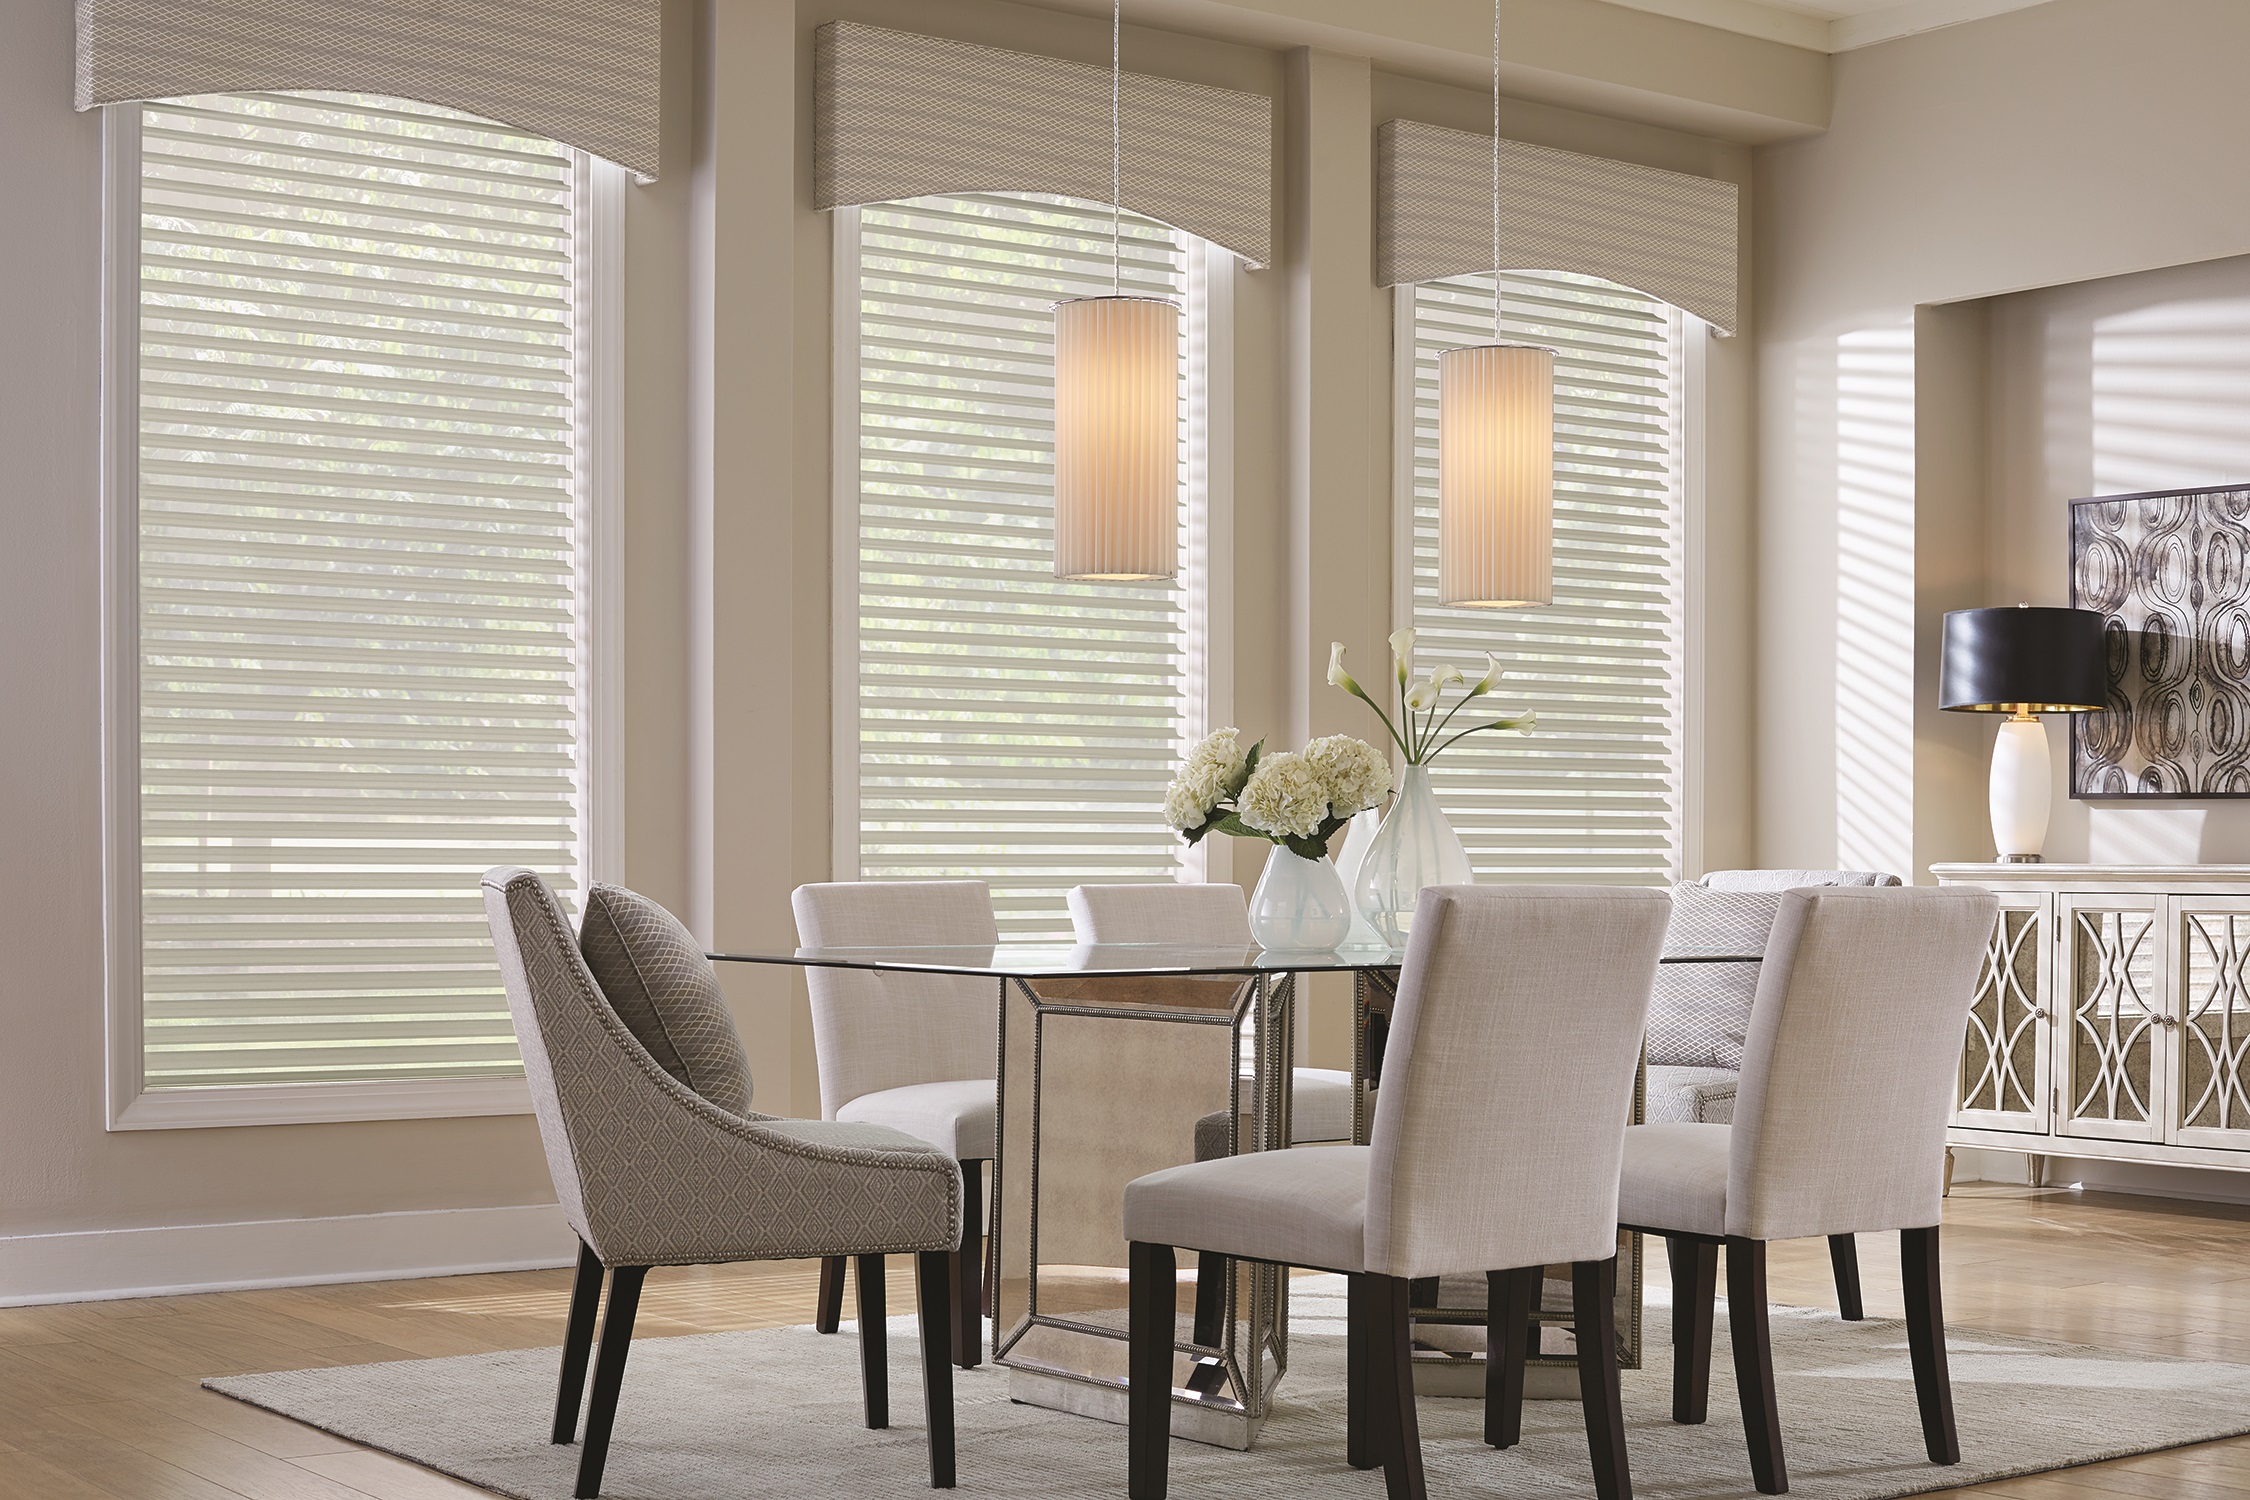 image of dual shades in dining room environment